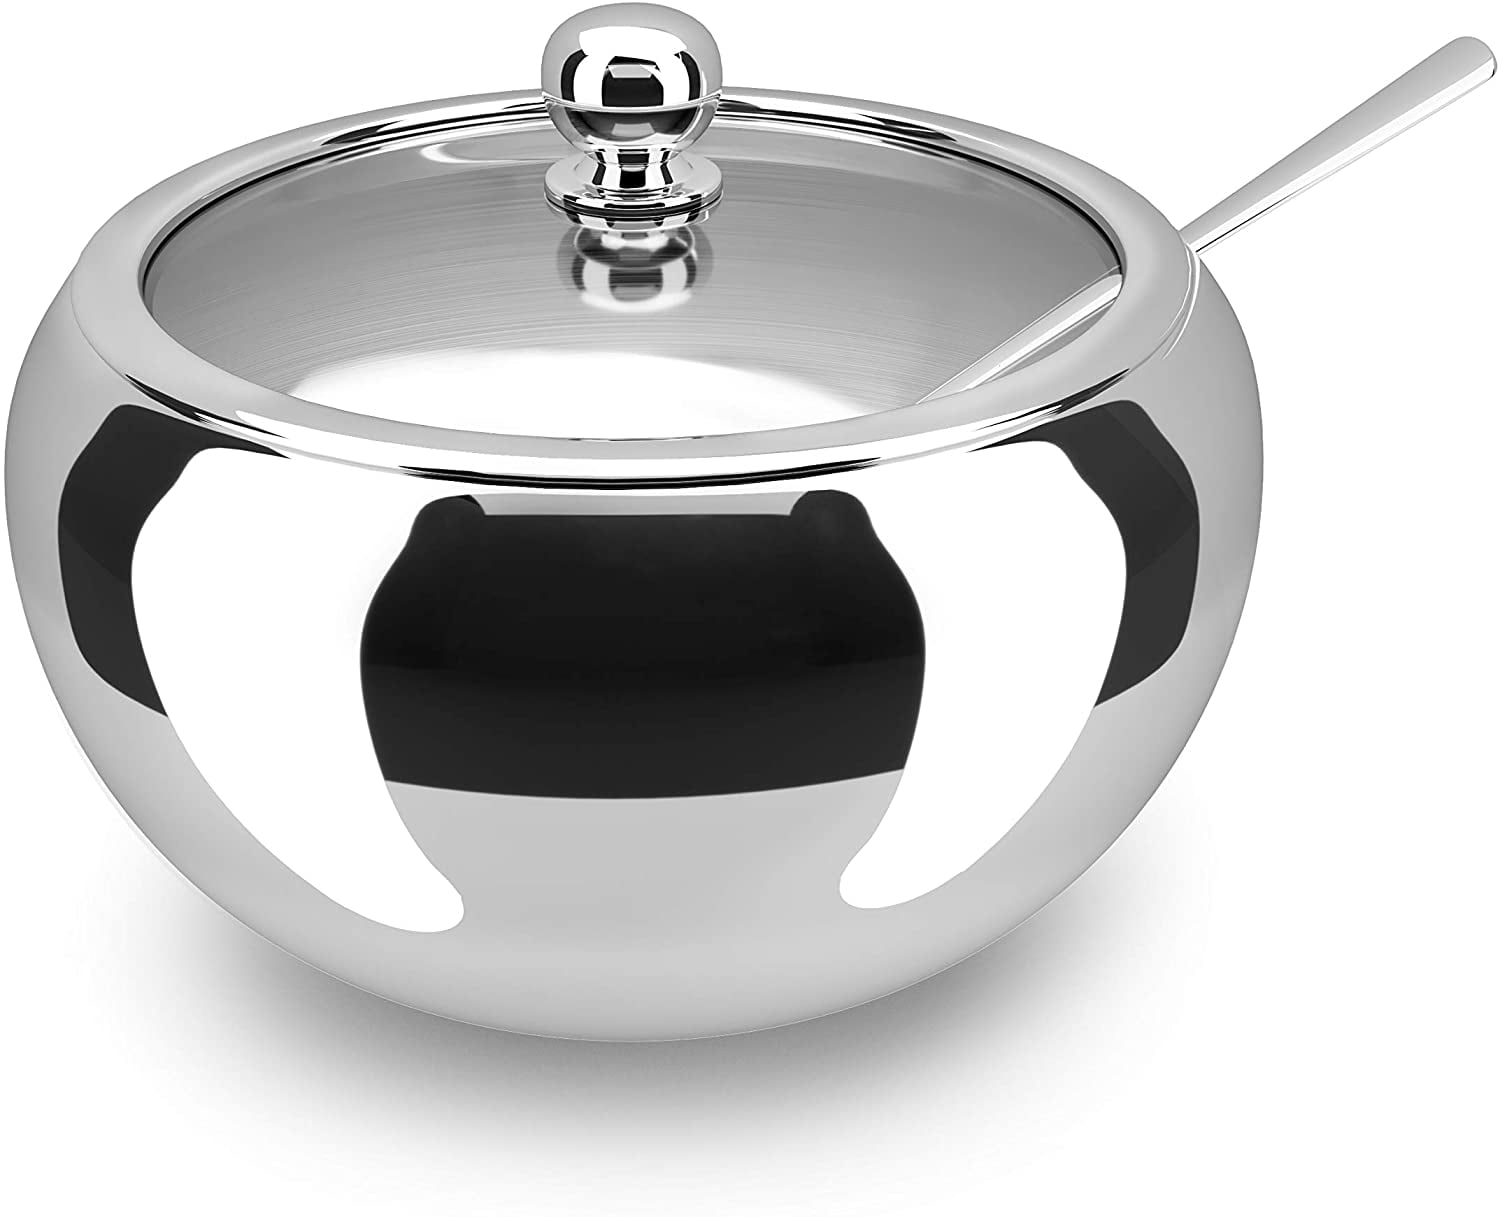 Stainless Steel Drum Shape Sugar Pot with Clear Lid and Spoon for Home & Kitchen 240 Milliliter 8 OZ Newness Sugar Bowl 